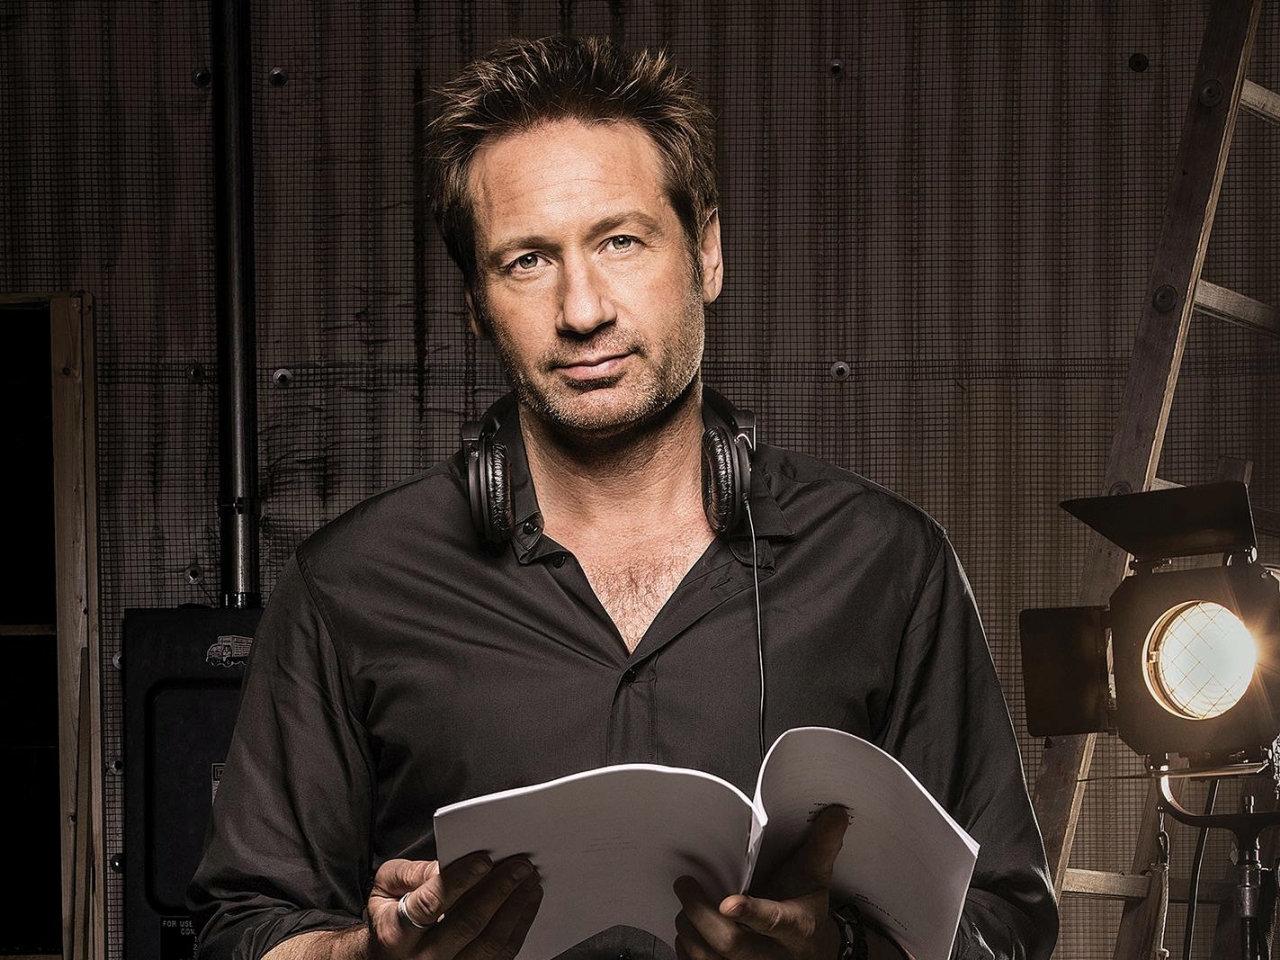 1280x960 Californication Hank Moody David Duchovny 1280x960 Images, Photos, Reviews